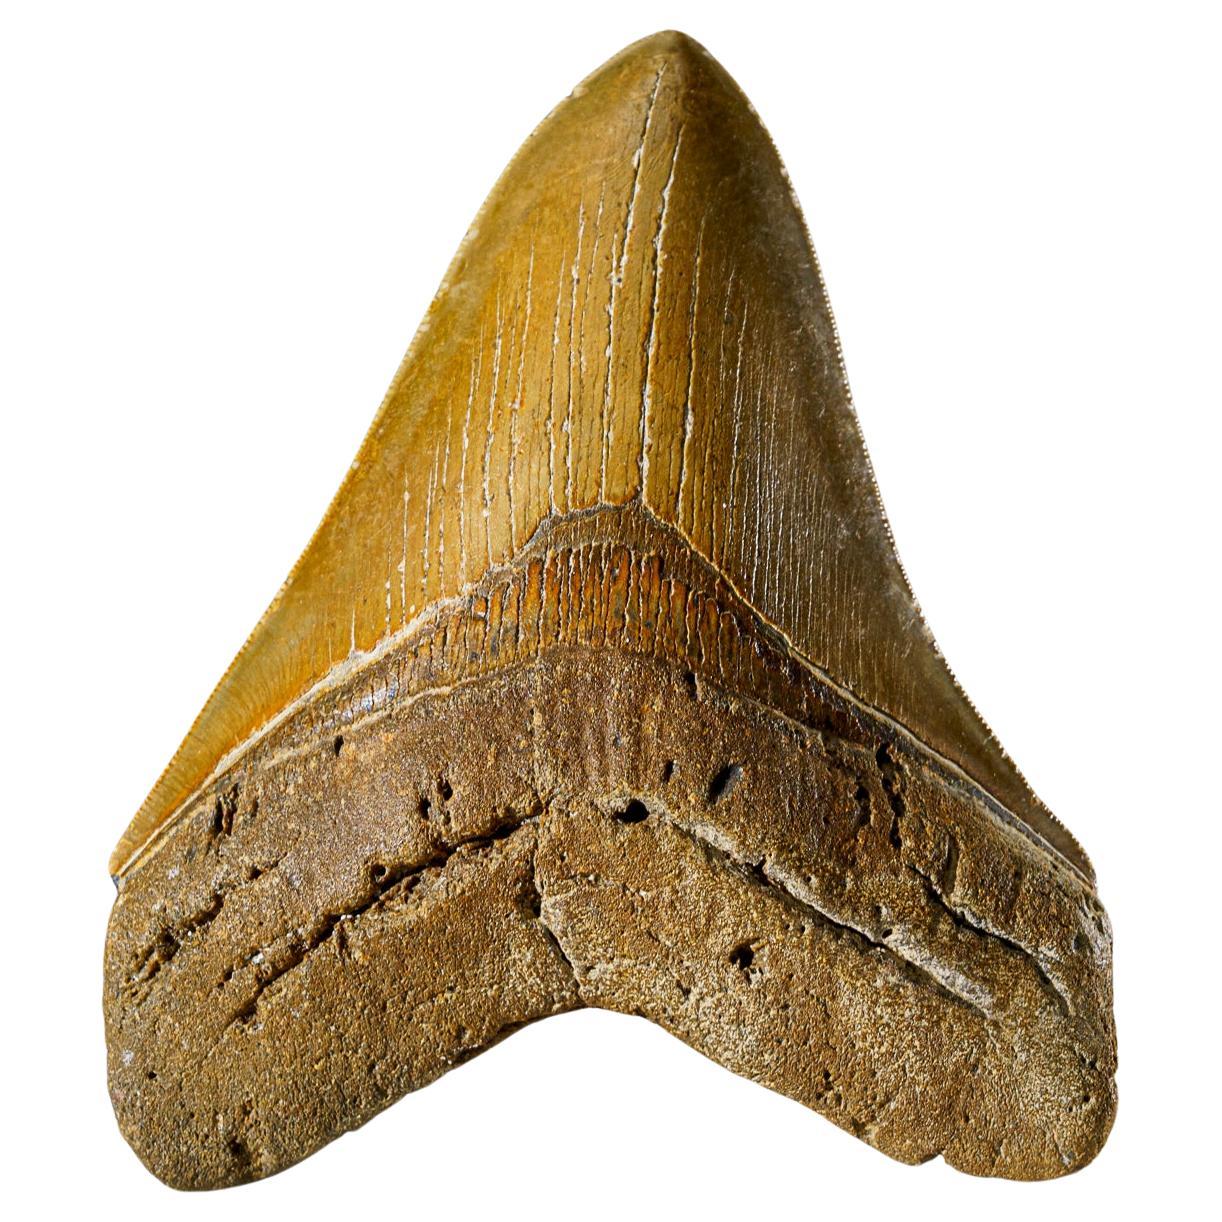 Genuine Serrated Megalodon Shark Tooth from Indonesia in Display Box (293.9 gr)